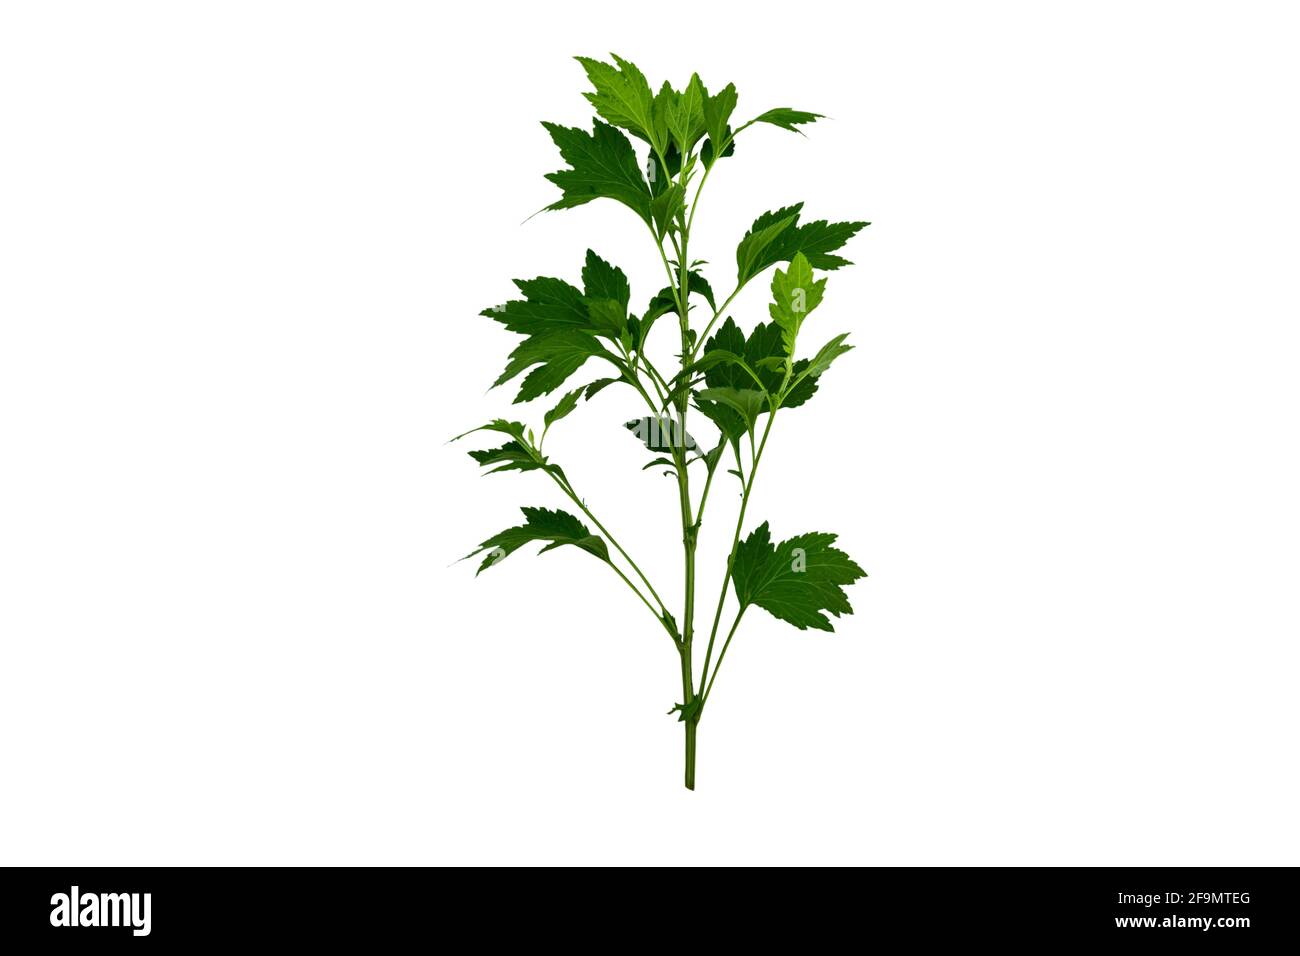 Close up green leaf of White mugwort plant (Artemisia lactiflora) isolated on white background.Saved with clipping path. Stock Photo